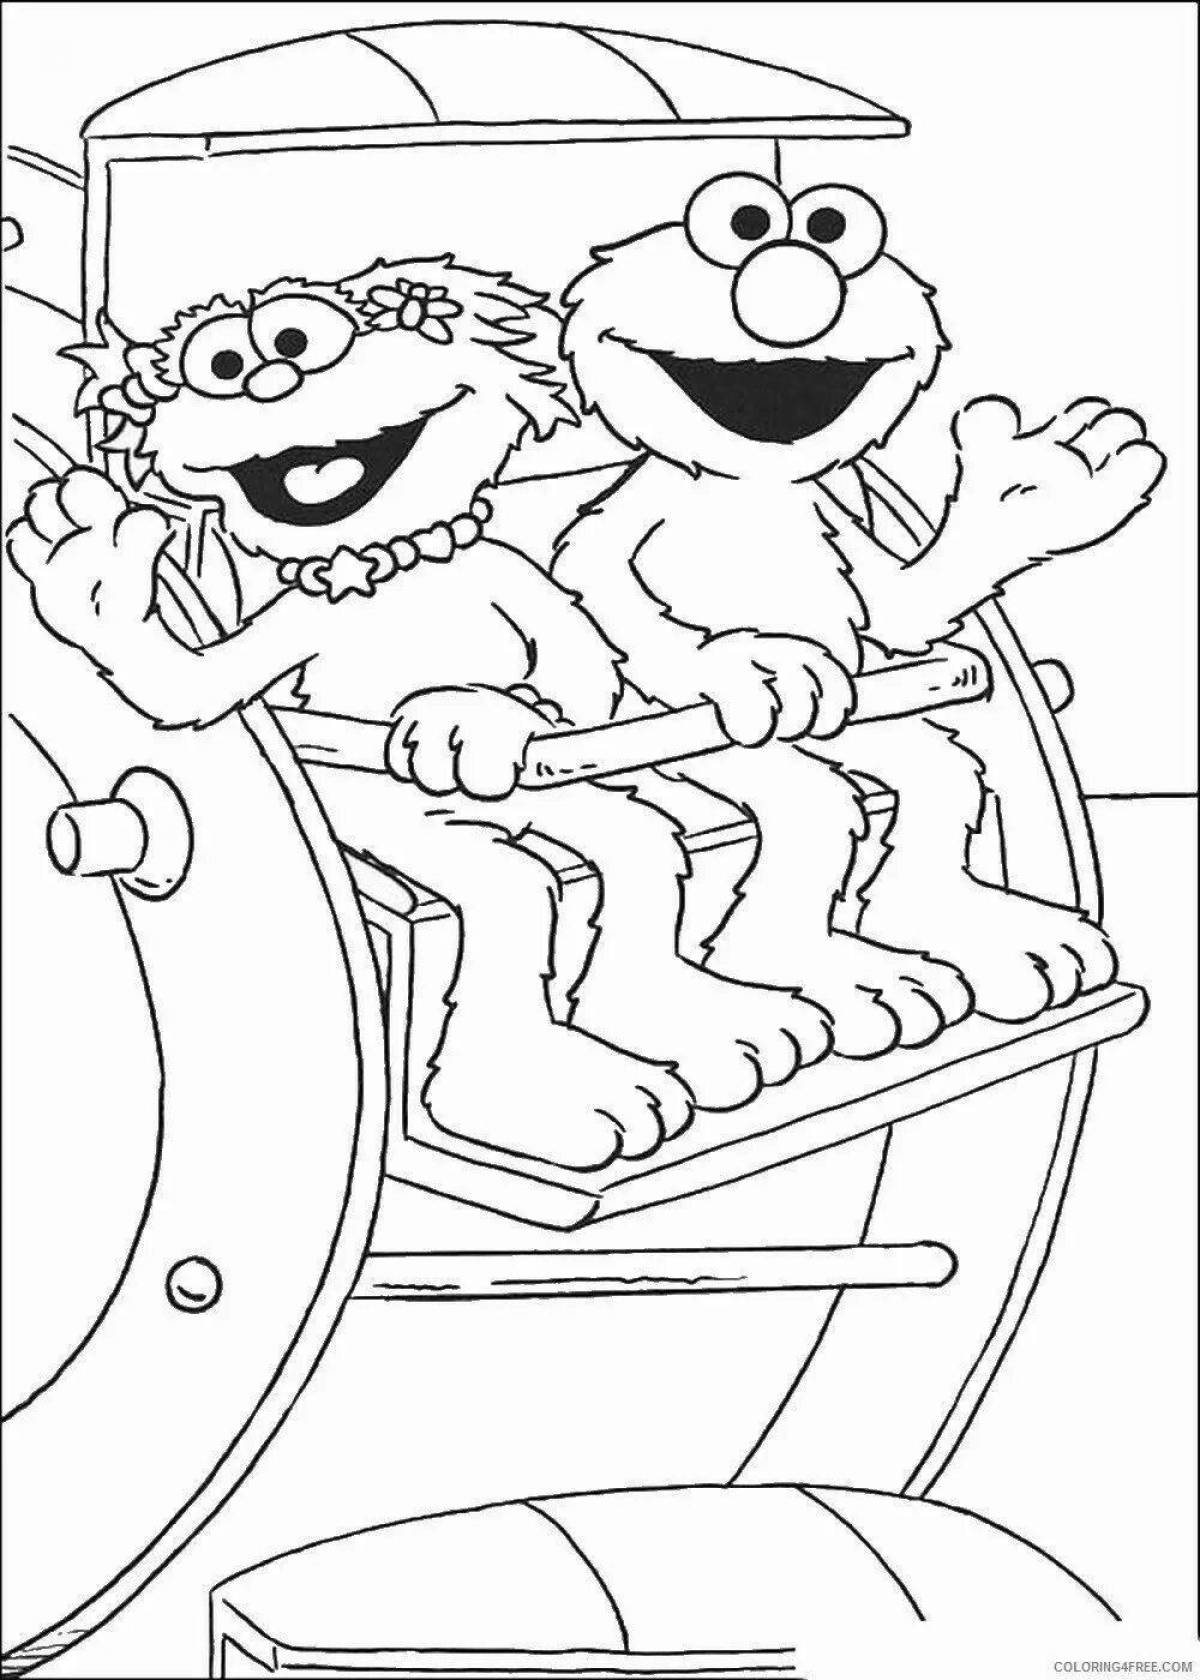 Delightful sesame street coloring page